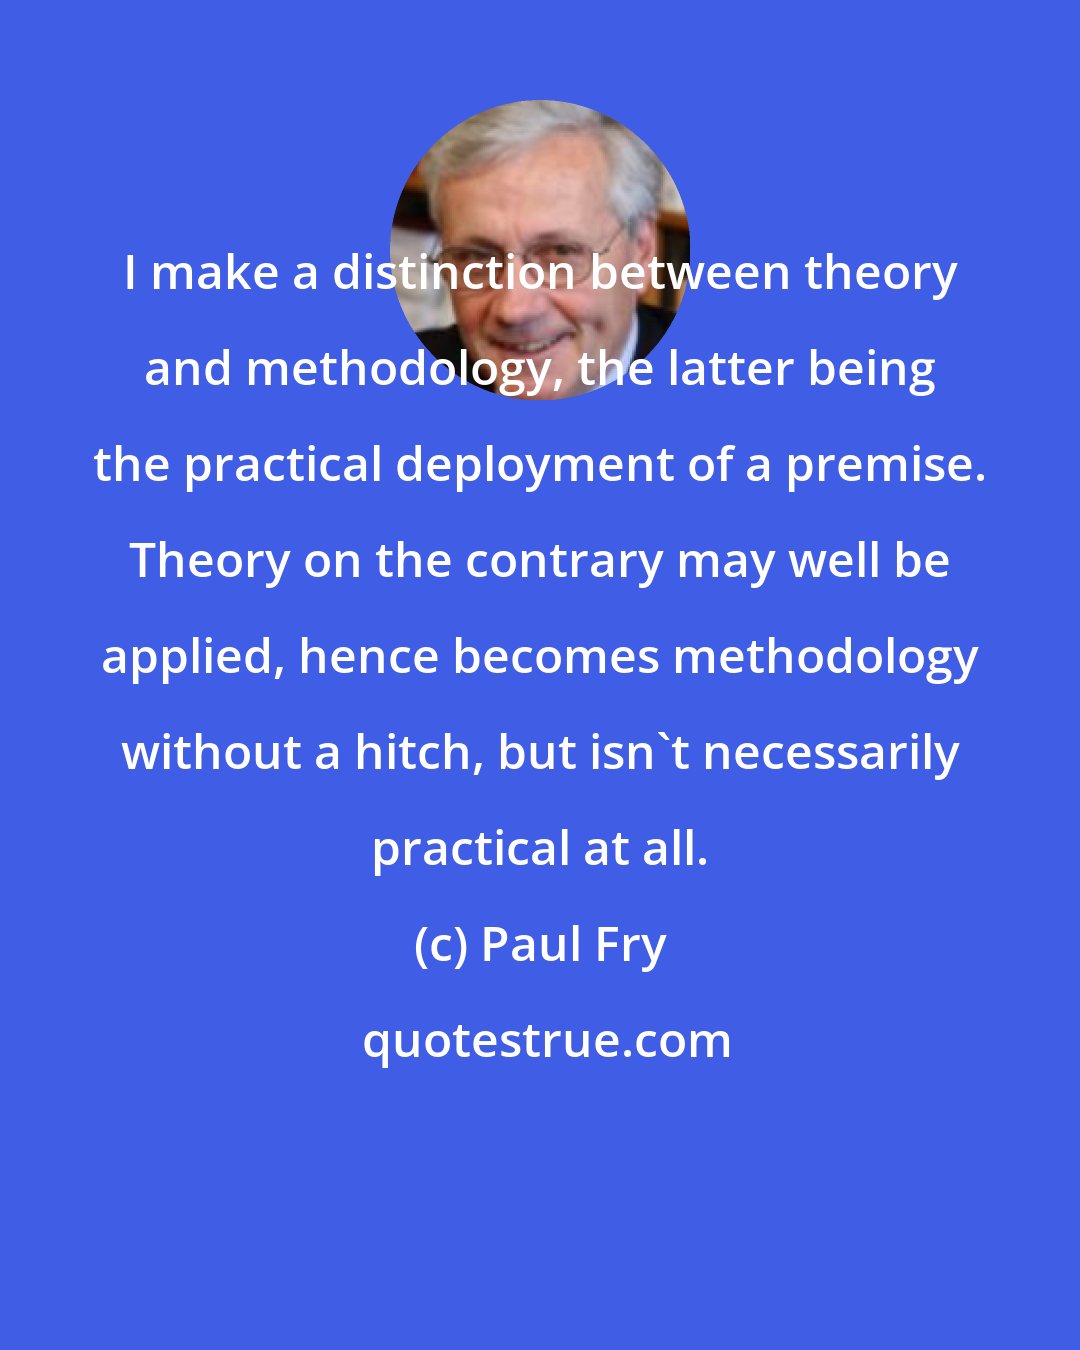 Paul Fry: I make a distinction between theory and methodology, the latter being the practical deployment of a premise. Theory on the contrary may well be applied, hence becomes methodology without a hitch, but isn't necessarily practical at all.